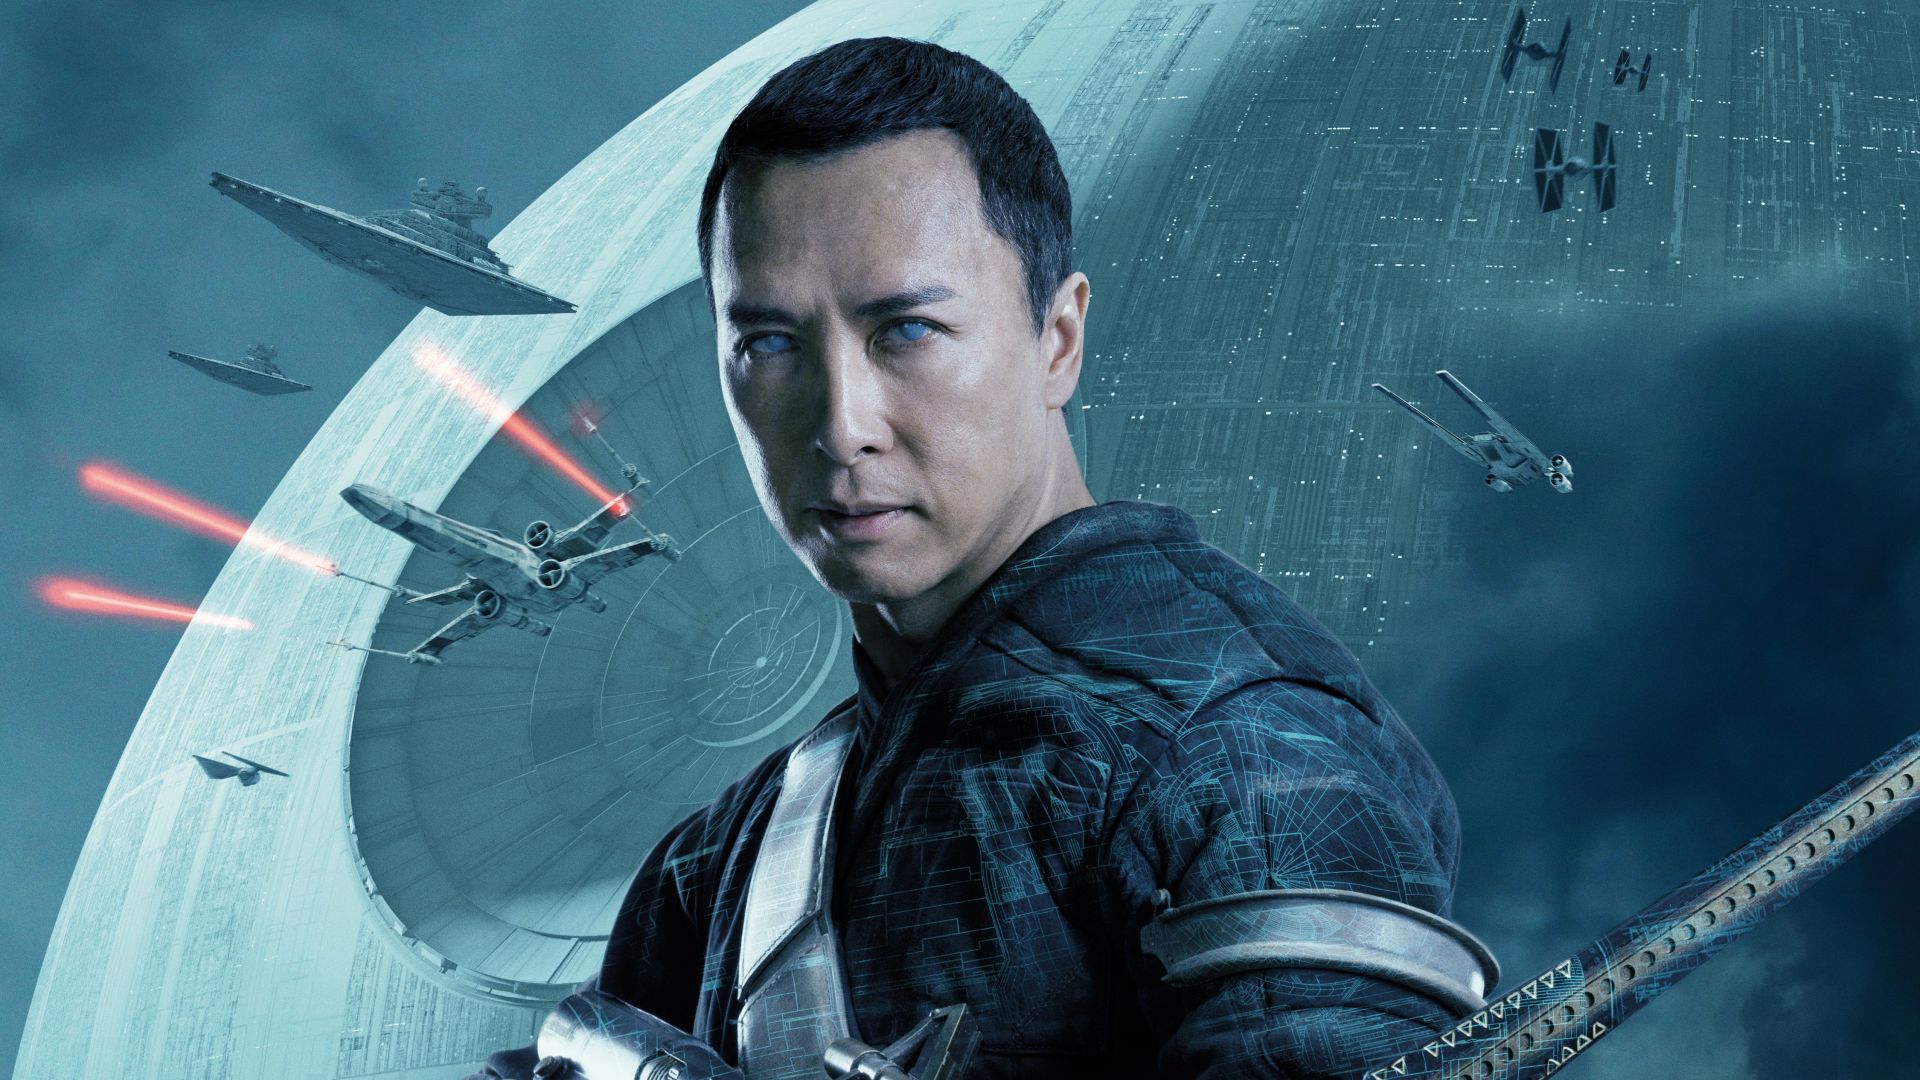 Wallpaper Donnie yen as chirrut imwe in rouge one movie